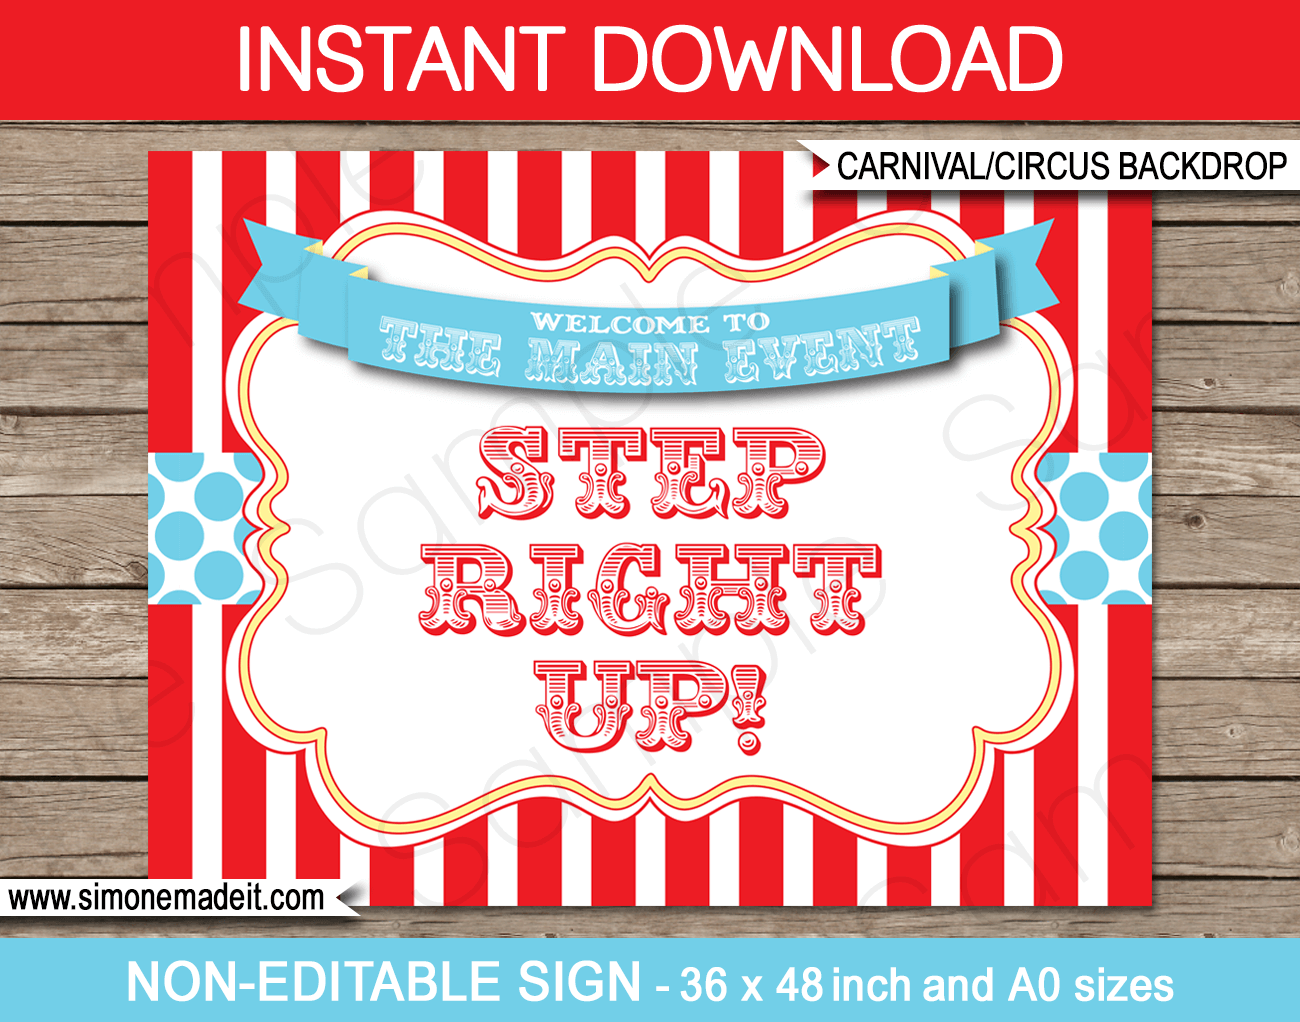 Printable Circus Backdrop Sign | Step Right Up | Carnival Party | Red Aqua | Decorations | DIY Template | INSTANT DOWNLOAD via simonemadeit.com